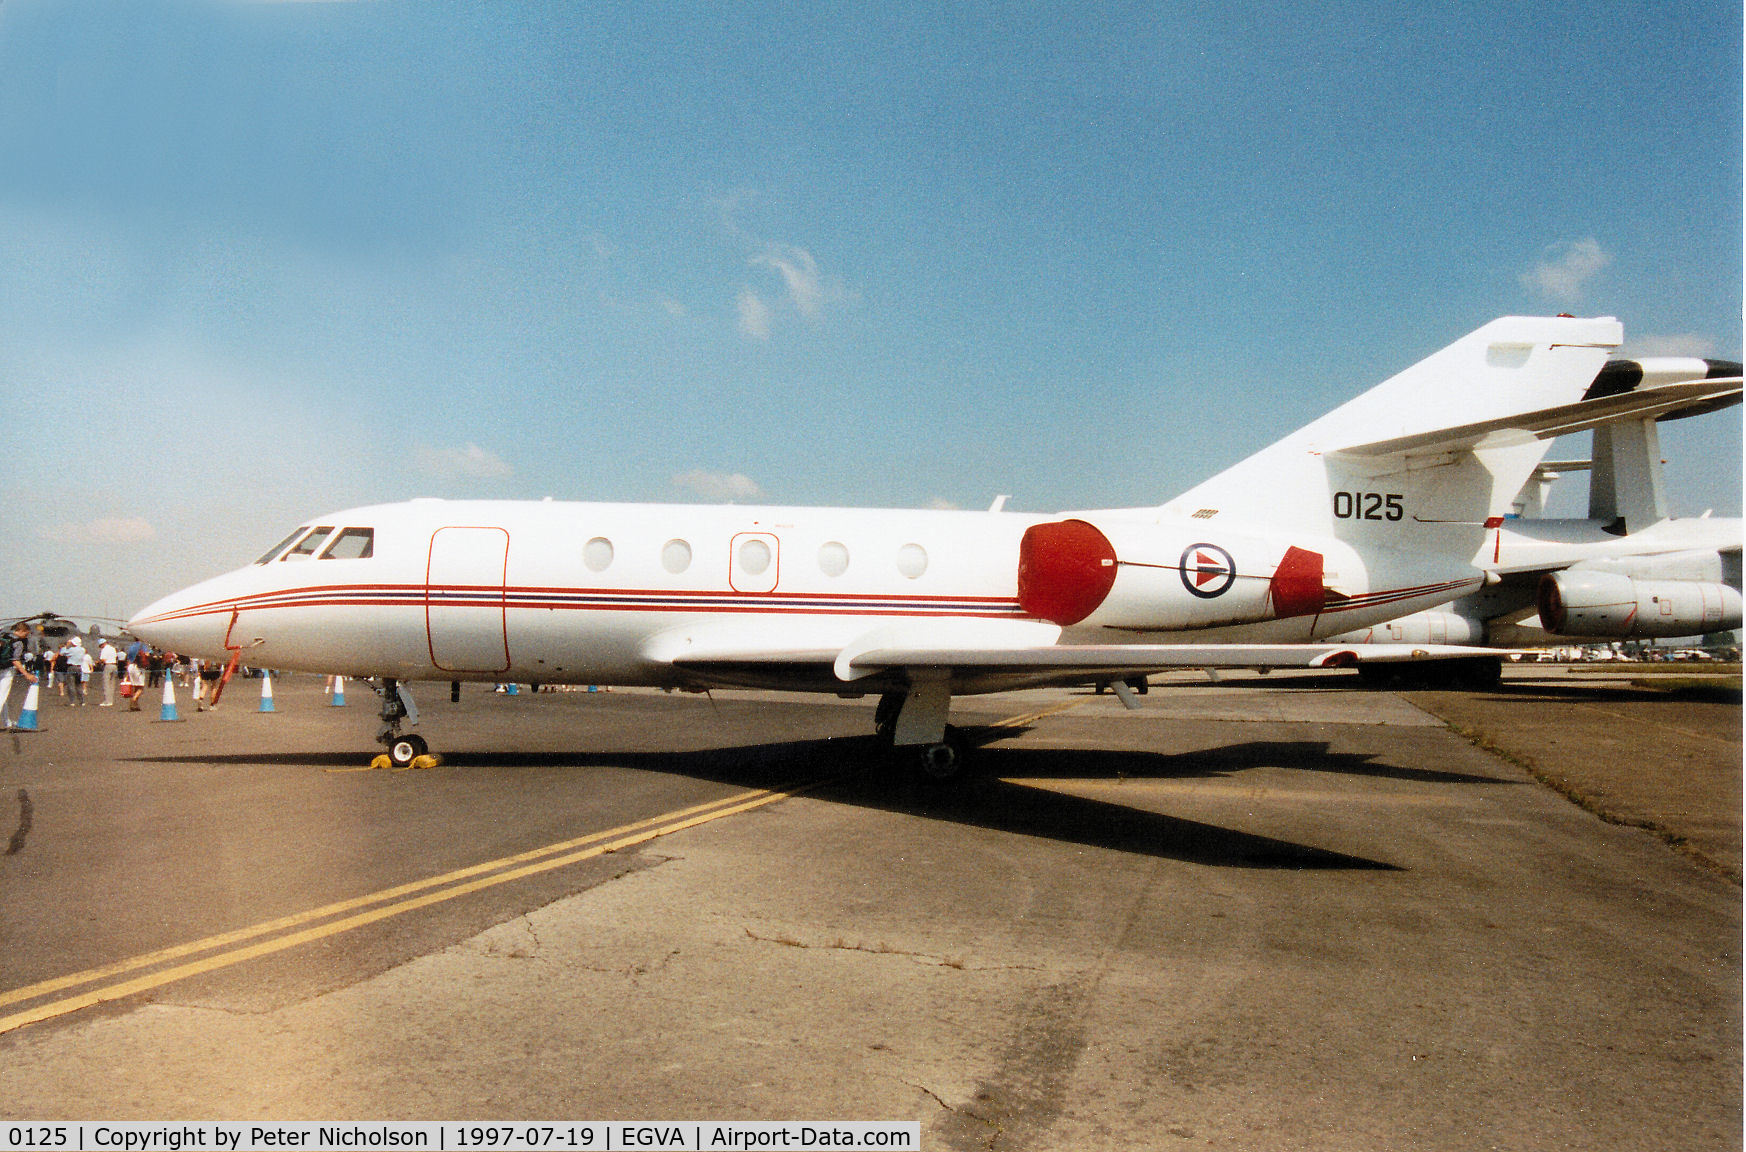 0125, Dassault Falcon (Mystere) 20C-5 C/N 125, Falcon 20ECM, callsign Norwegian 5006, of 717 Skv Royal Norwegian Air Force on display at the 1997 Intnl Air Tattoo at RAF Fairford.